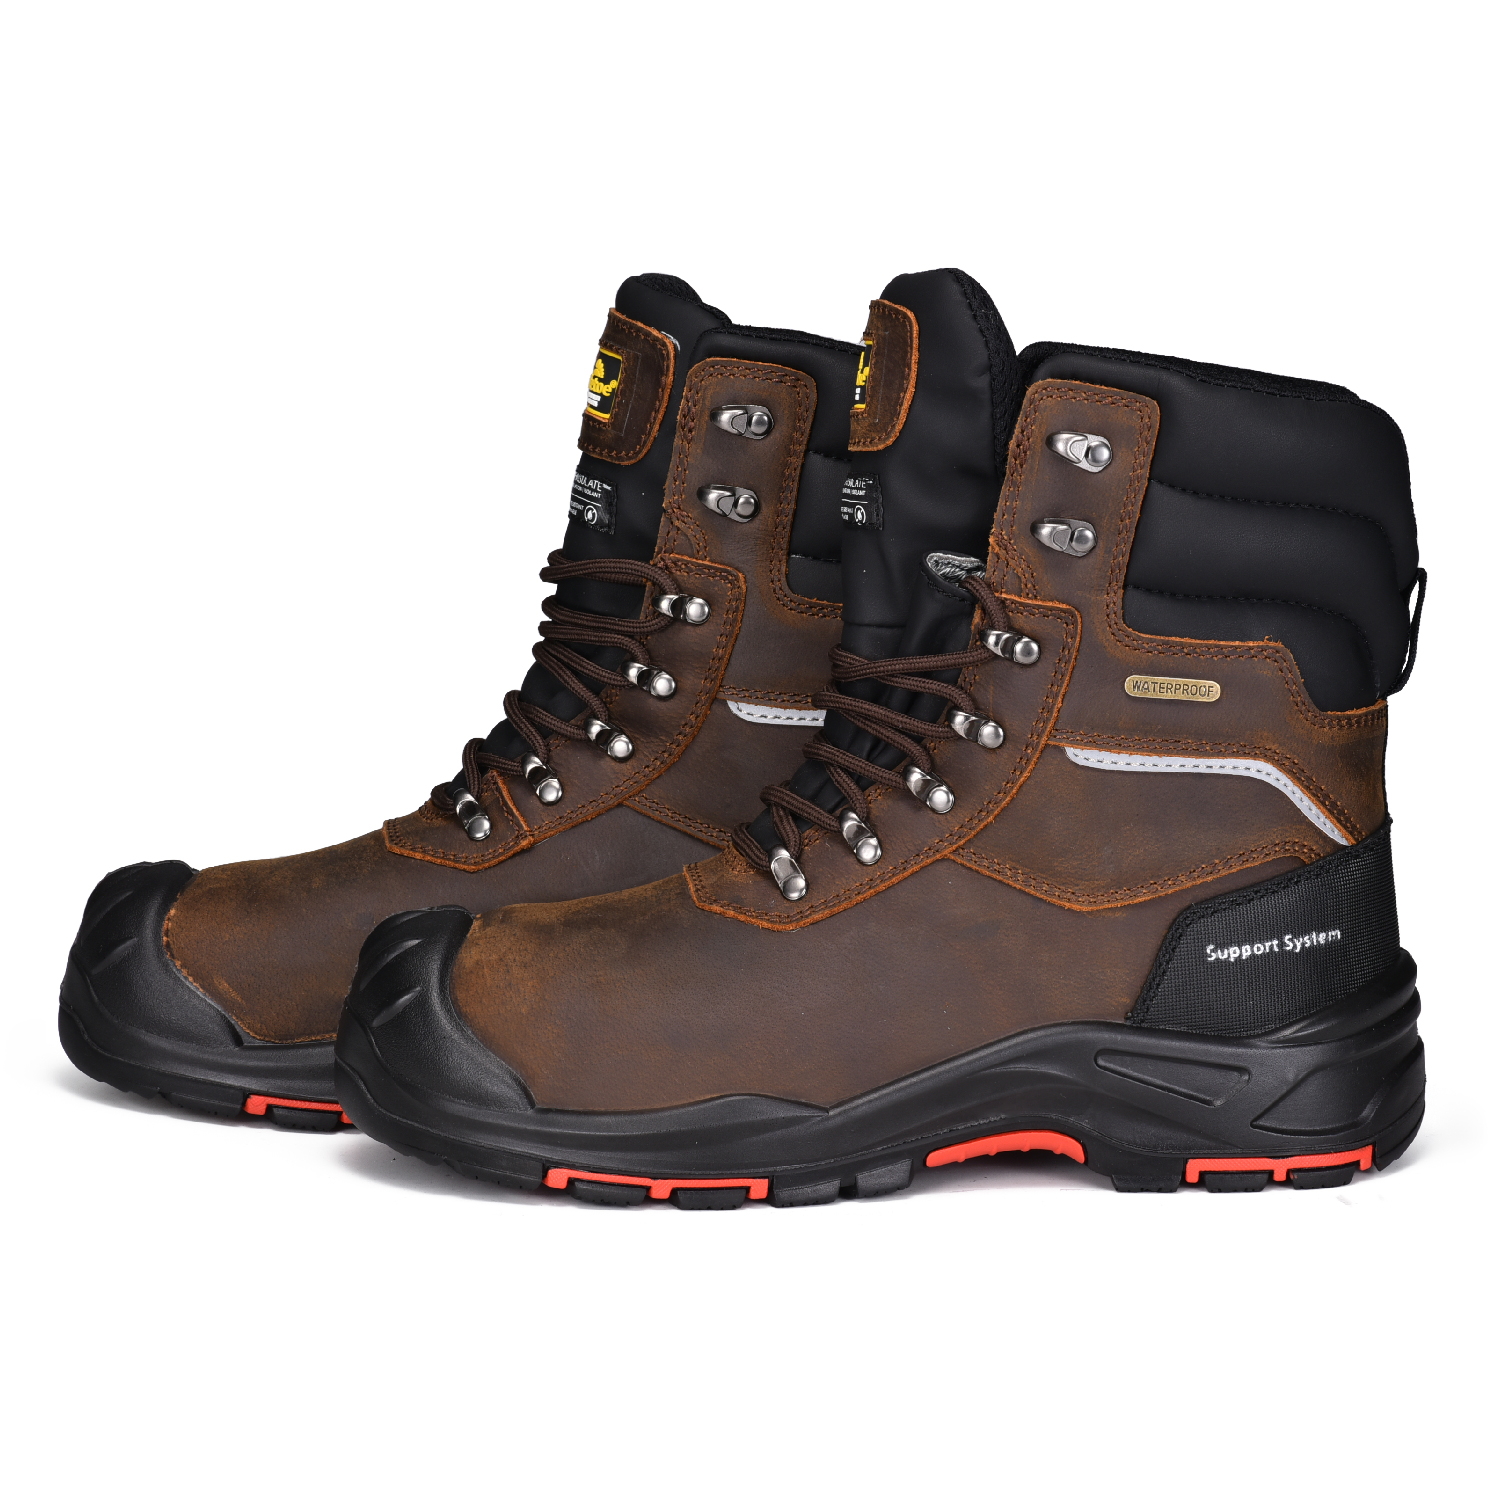 S7 Waterproof Safety Boots For Winter Men Cold Storage Work Boots